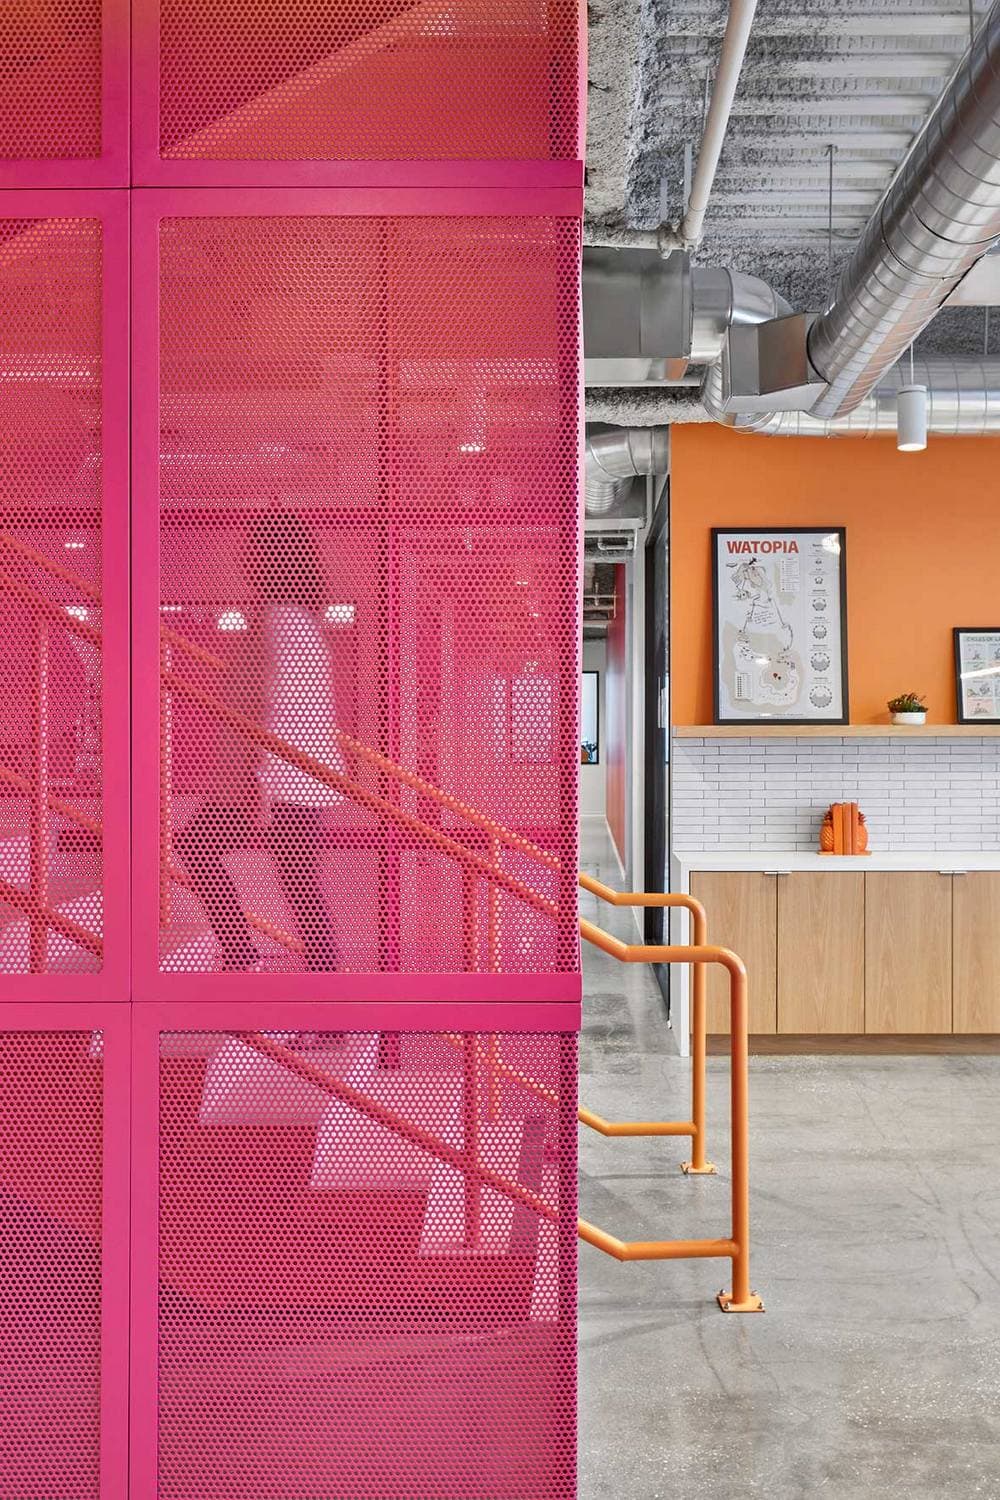 Zwift Office Remodel by IA Interior Architects